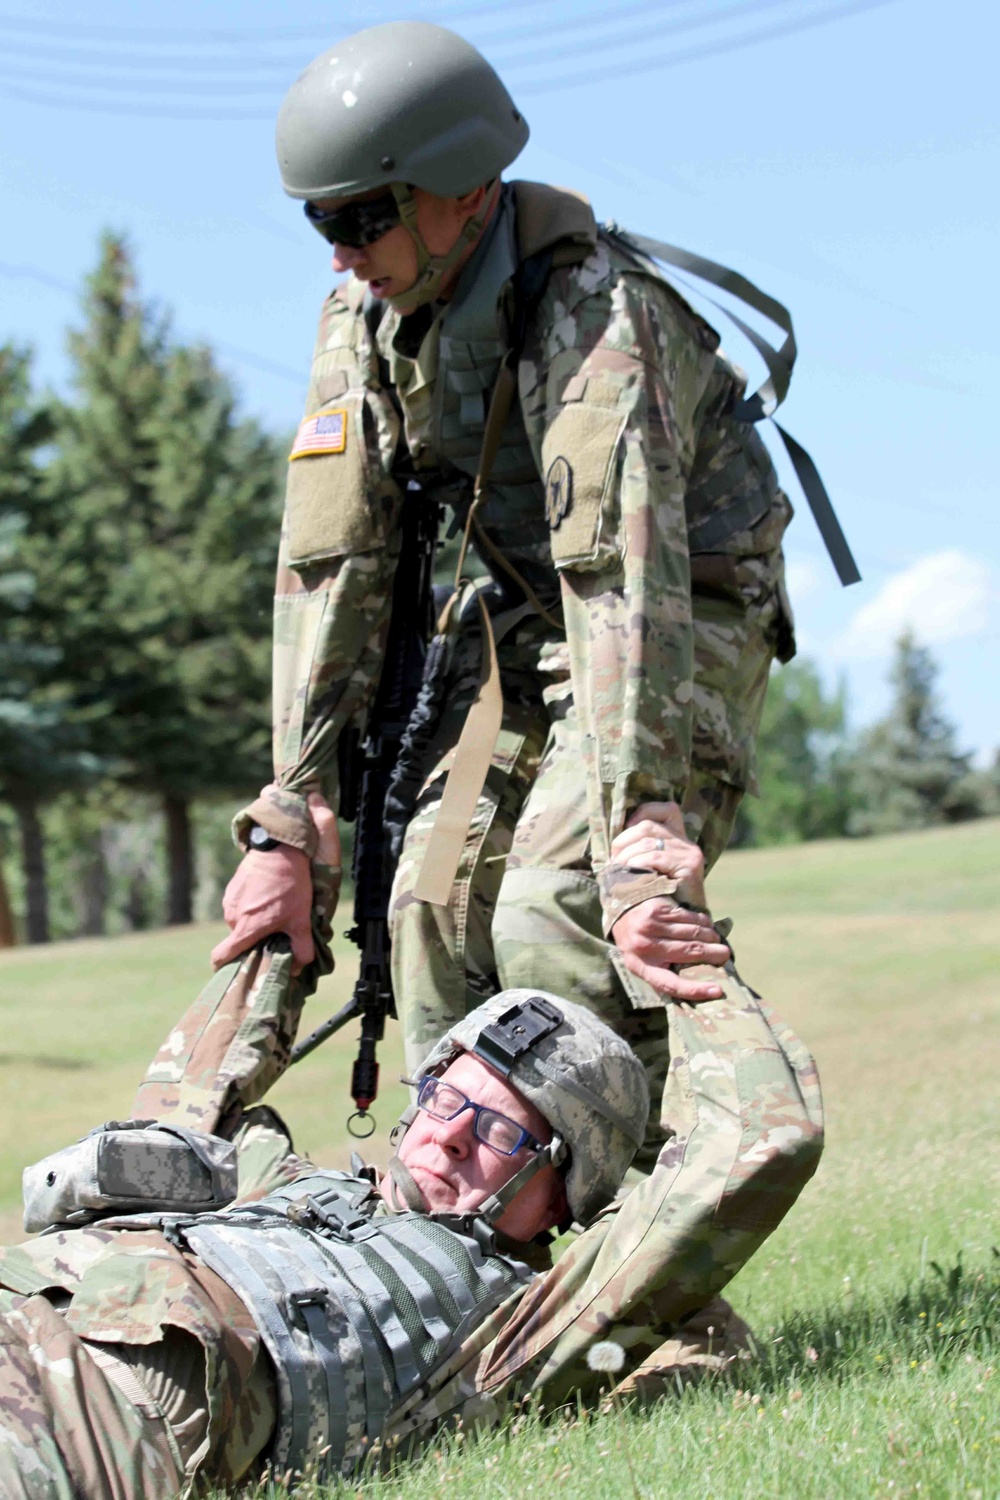 D.C. Soldiers stress realism in training